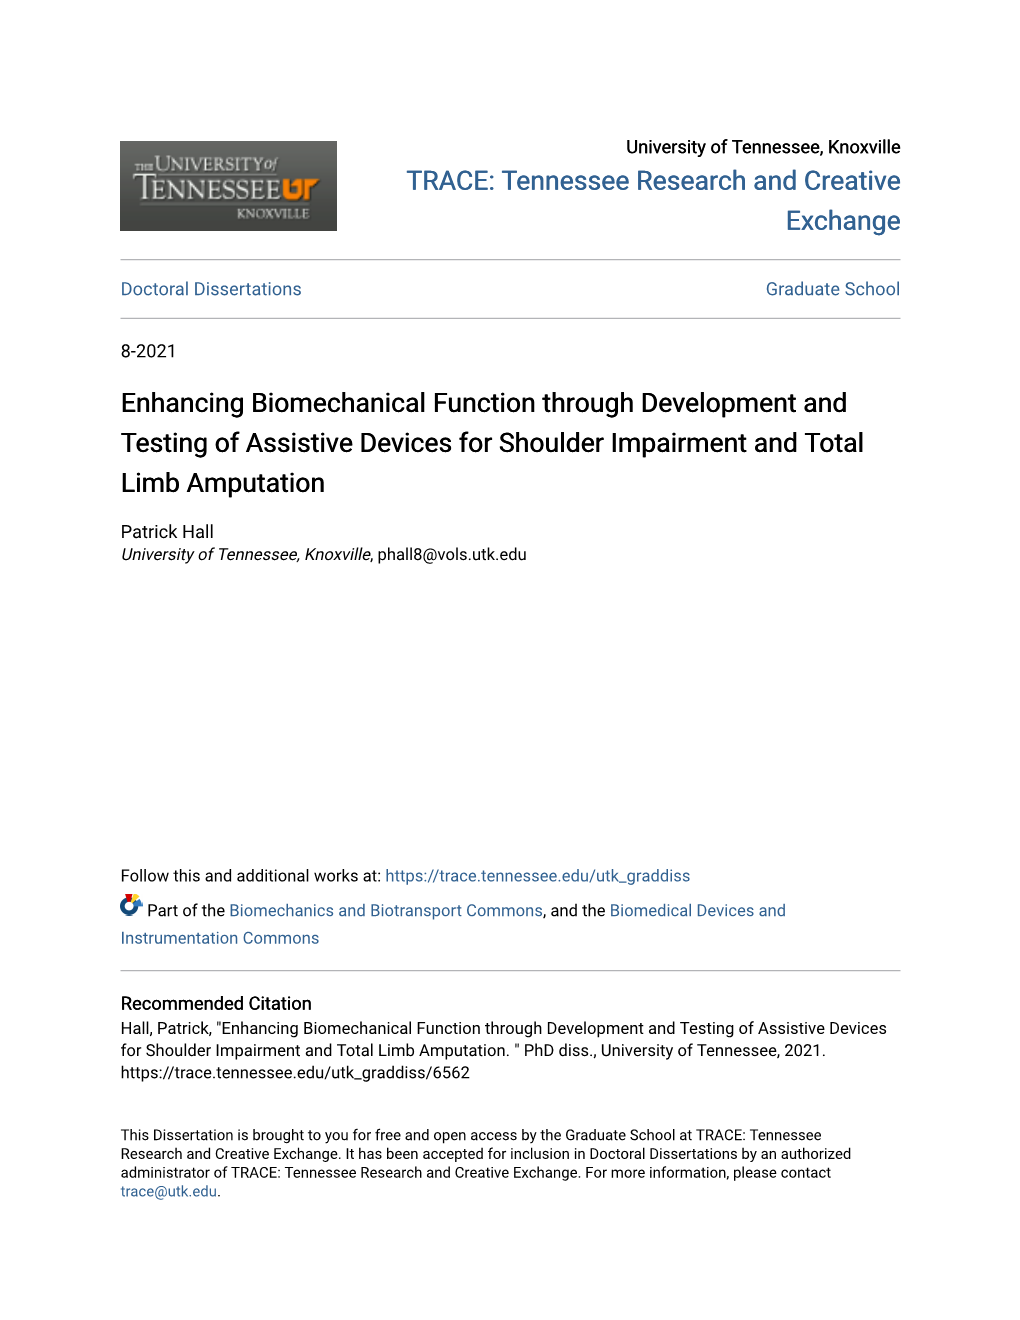 Enhancing Biomechanical Function Through Development and Testing of Assistive Devices for Shoulder Impairment and Total Limb Amputation